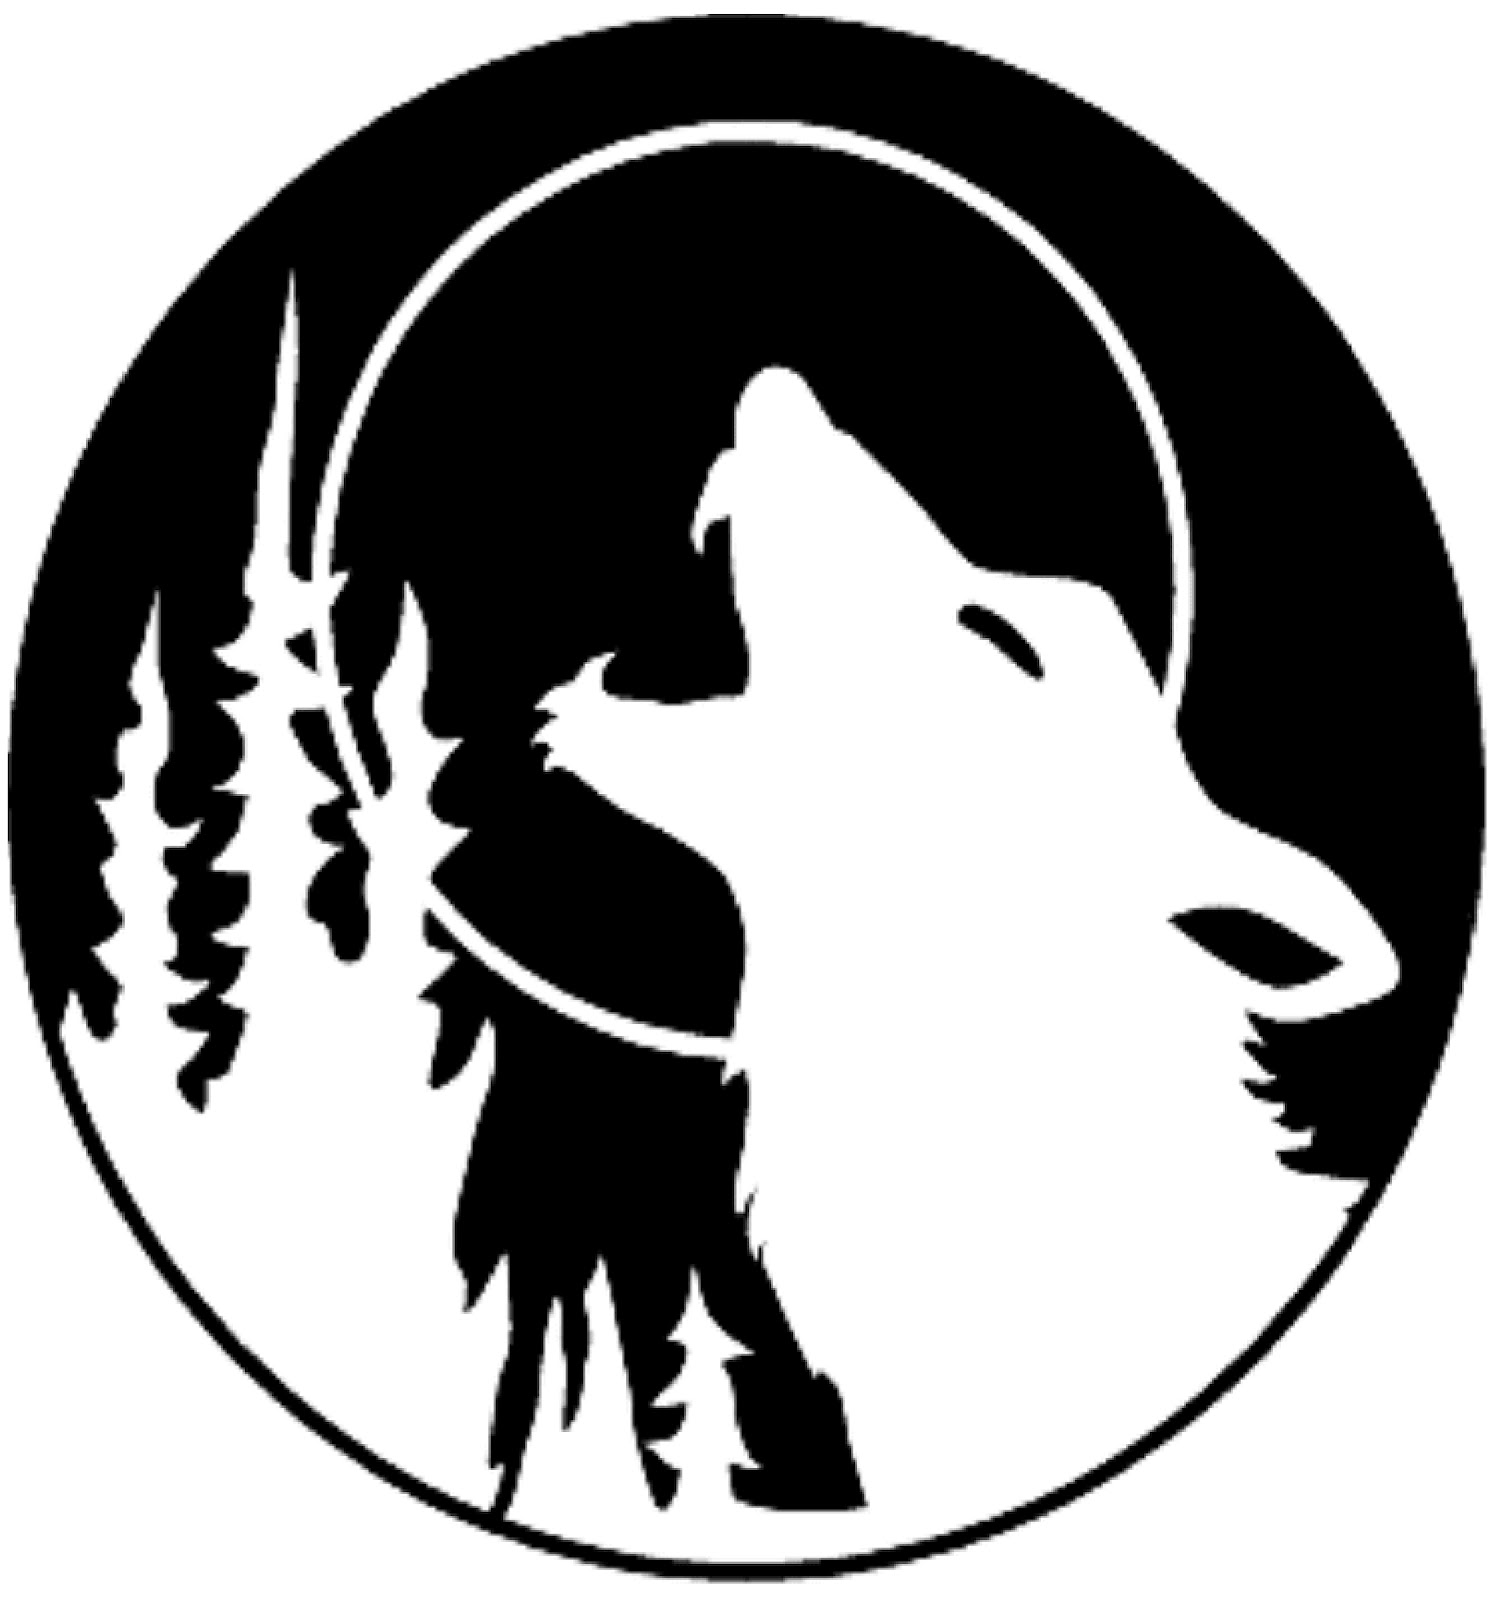 Howling wolf clipart